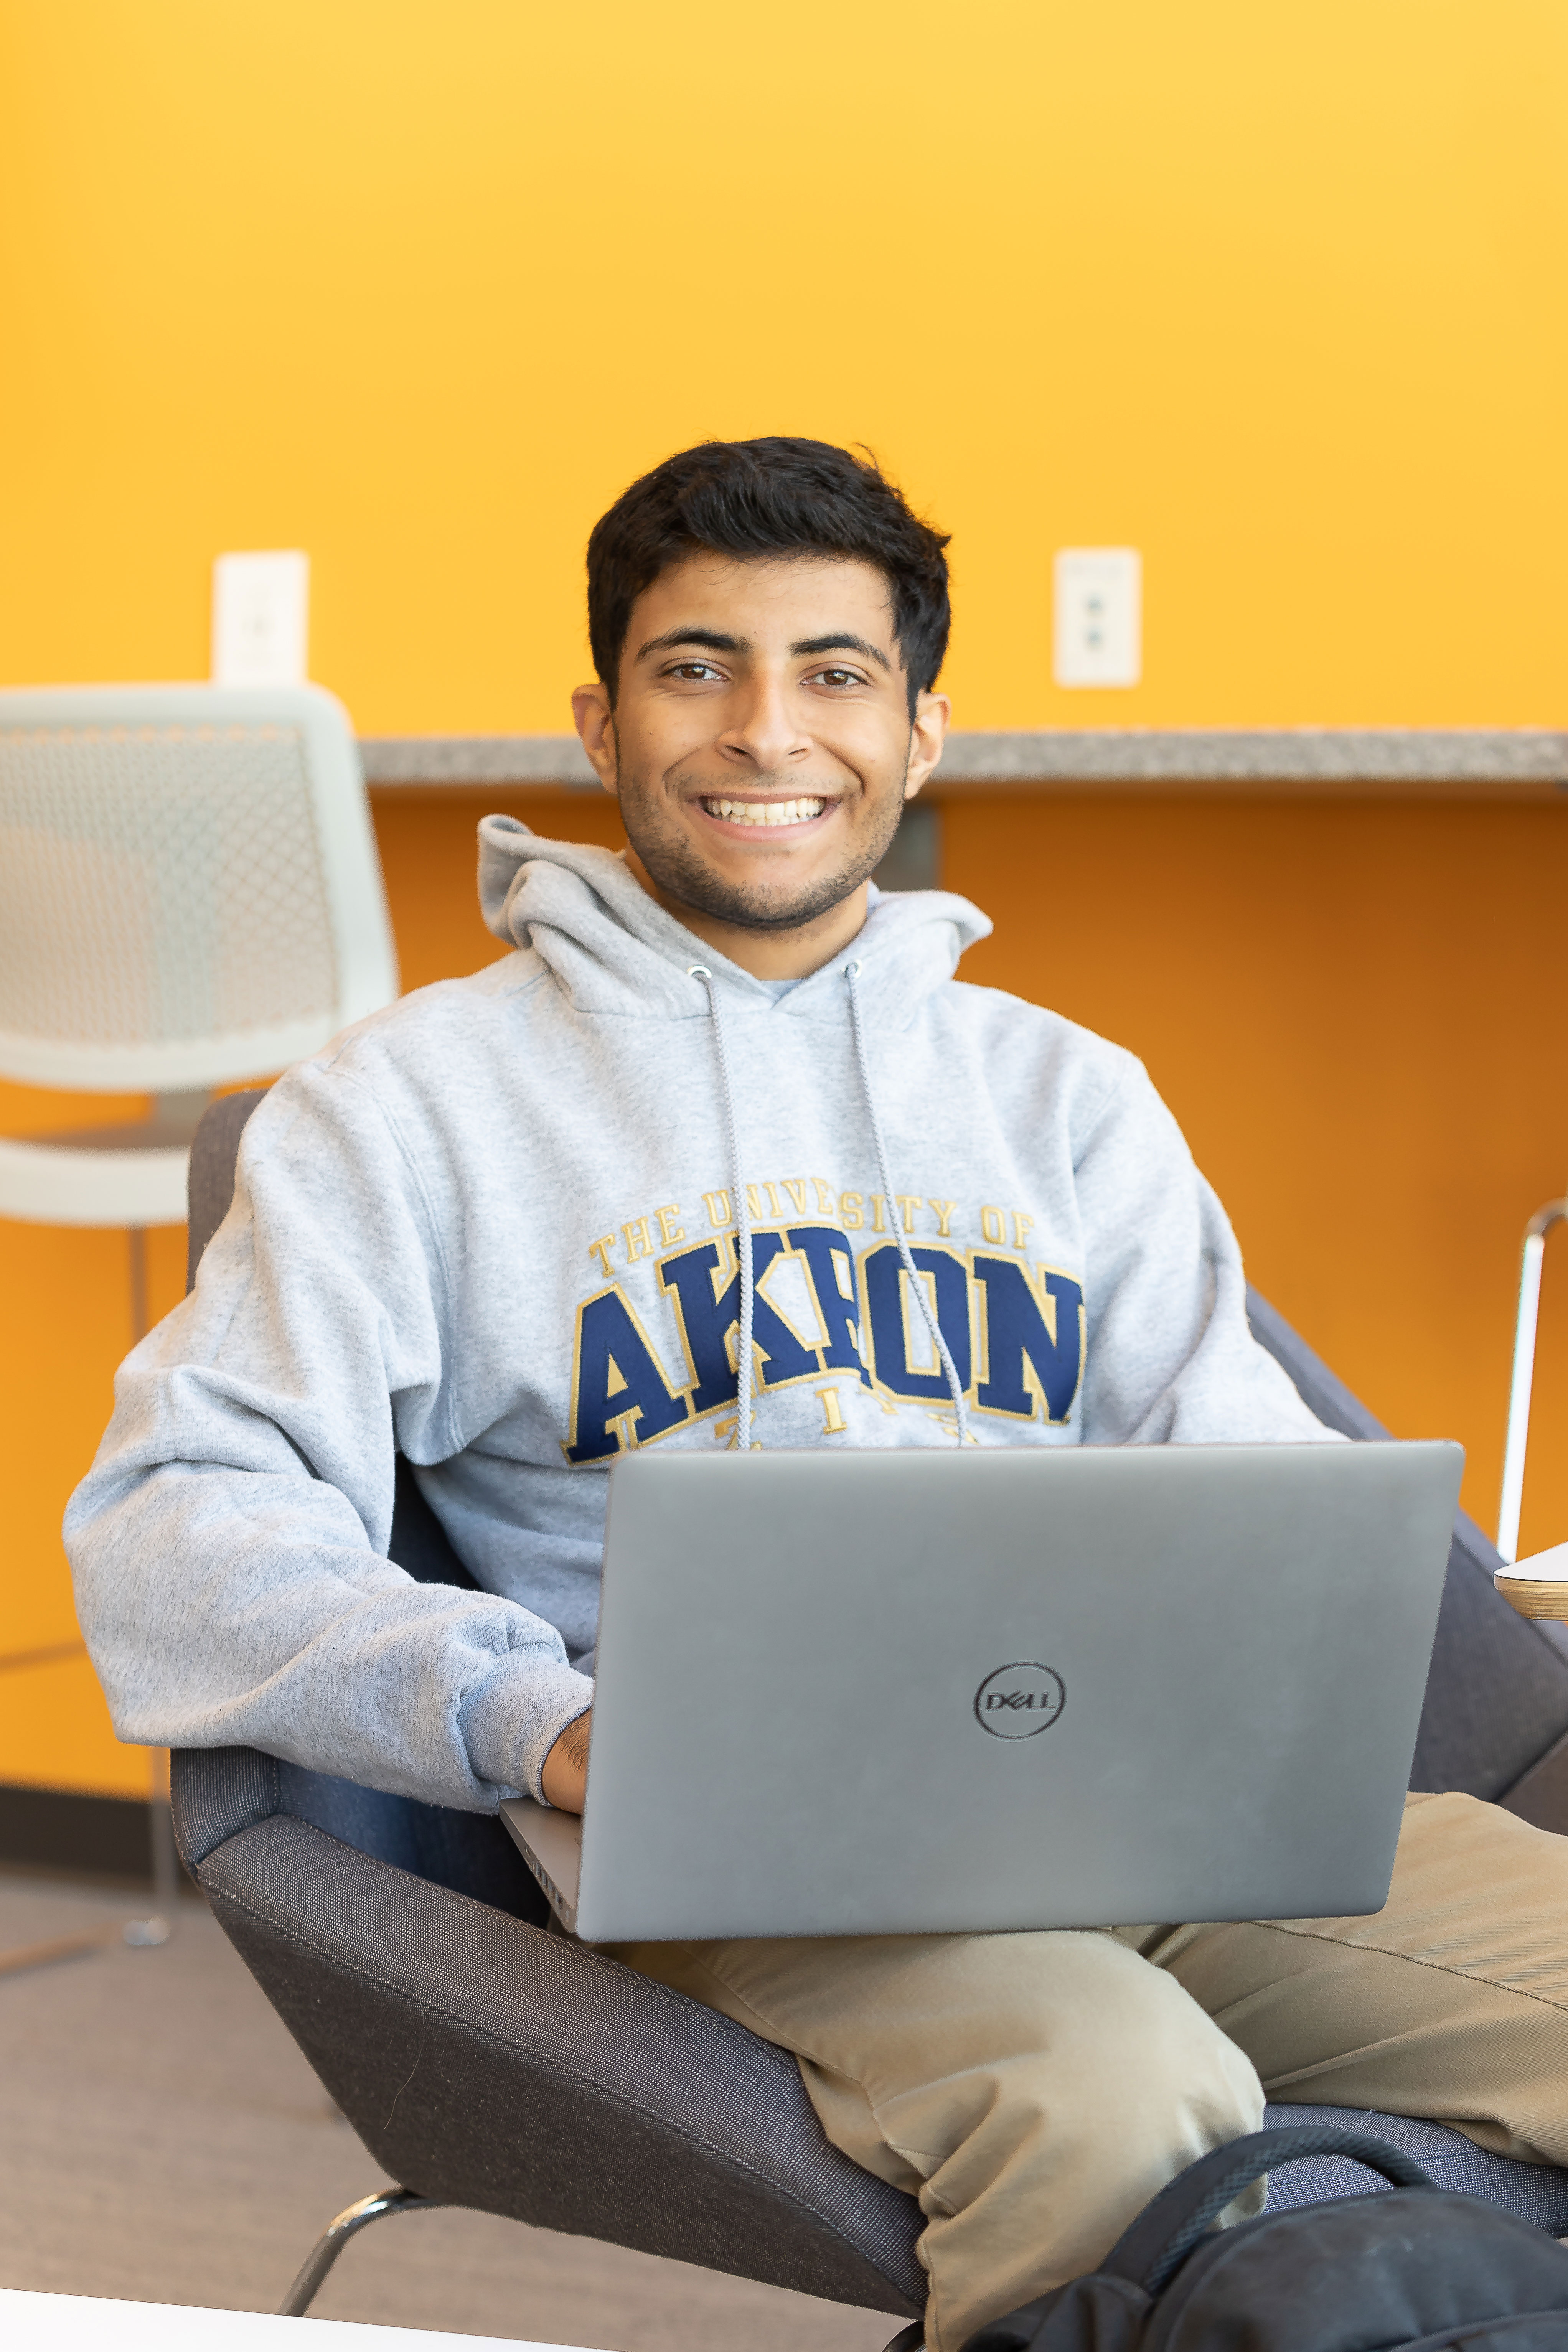 Shareef Awadallah an honors student in the William Honors College at the University of Akron.